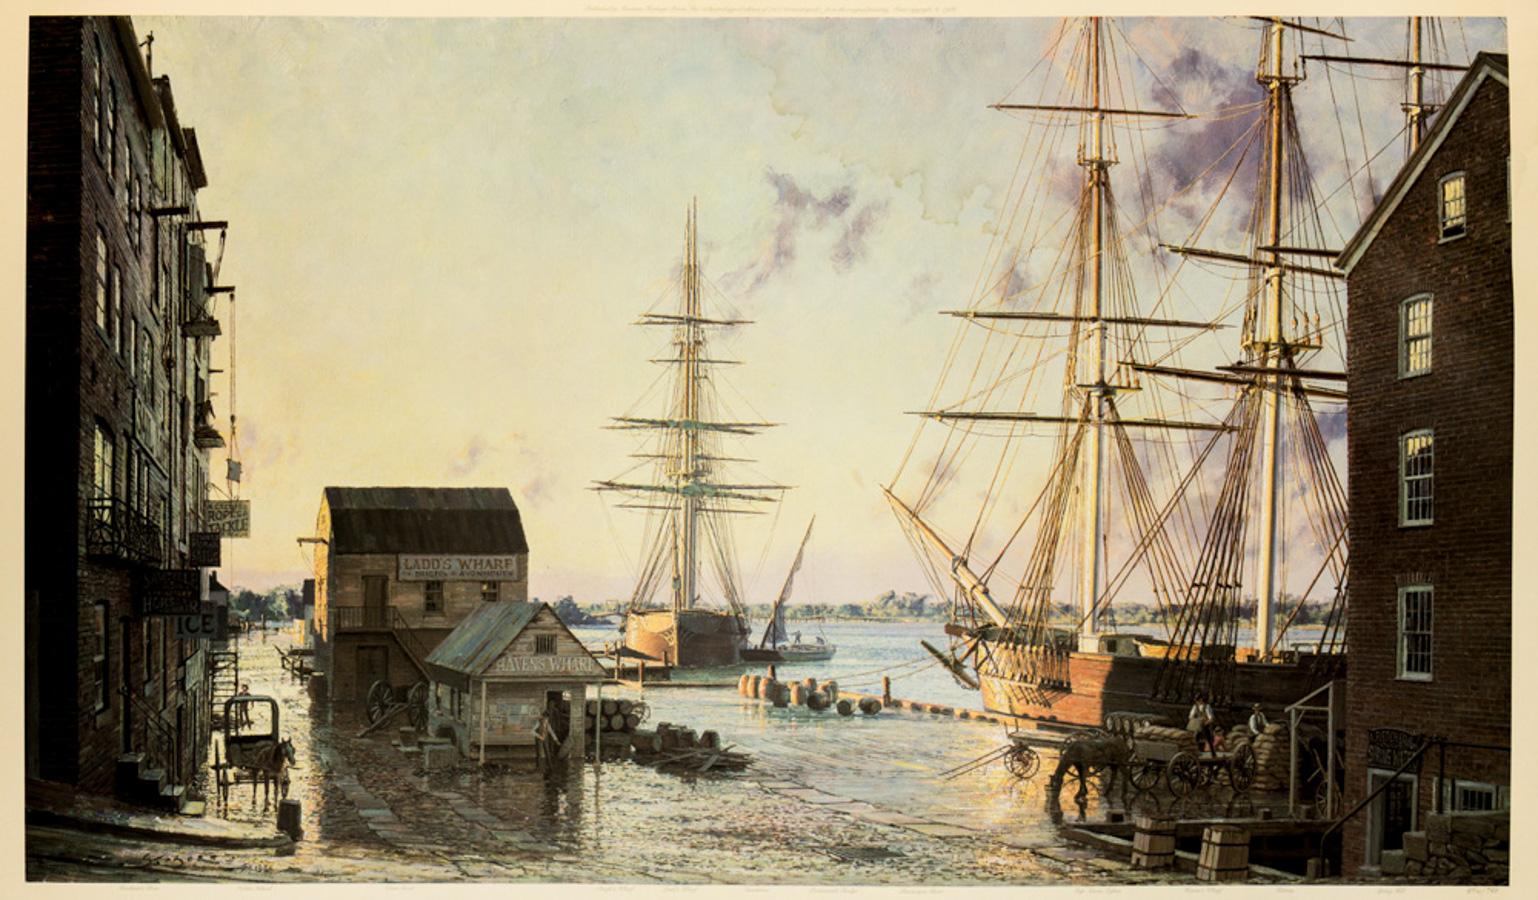 Portsmouth. Merchants Row, Overlooking New Hampshire's Pscatagua River, in 1828 - Print by John Stobart